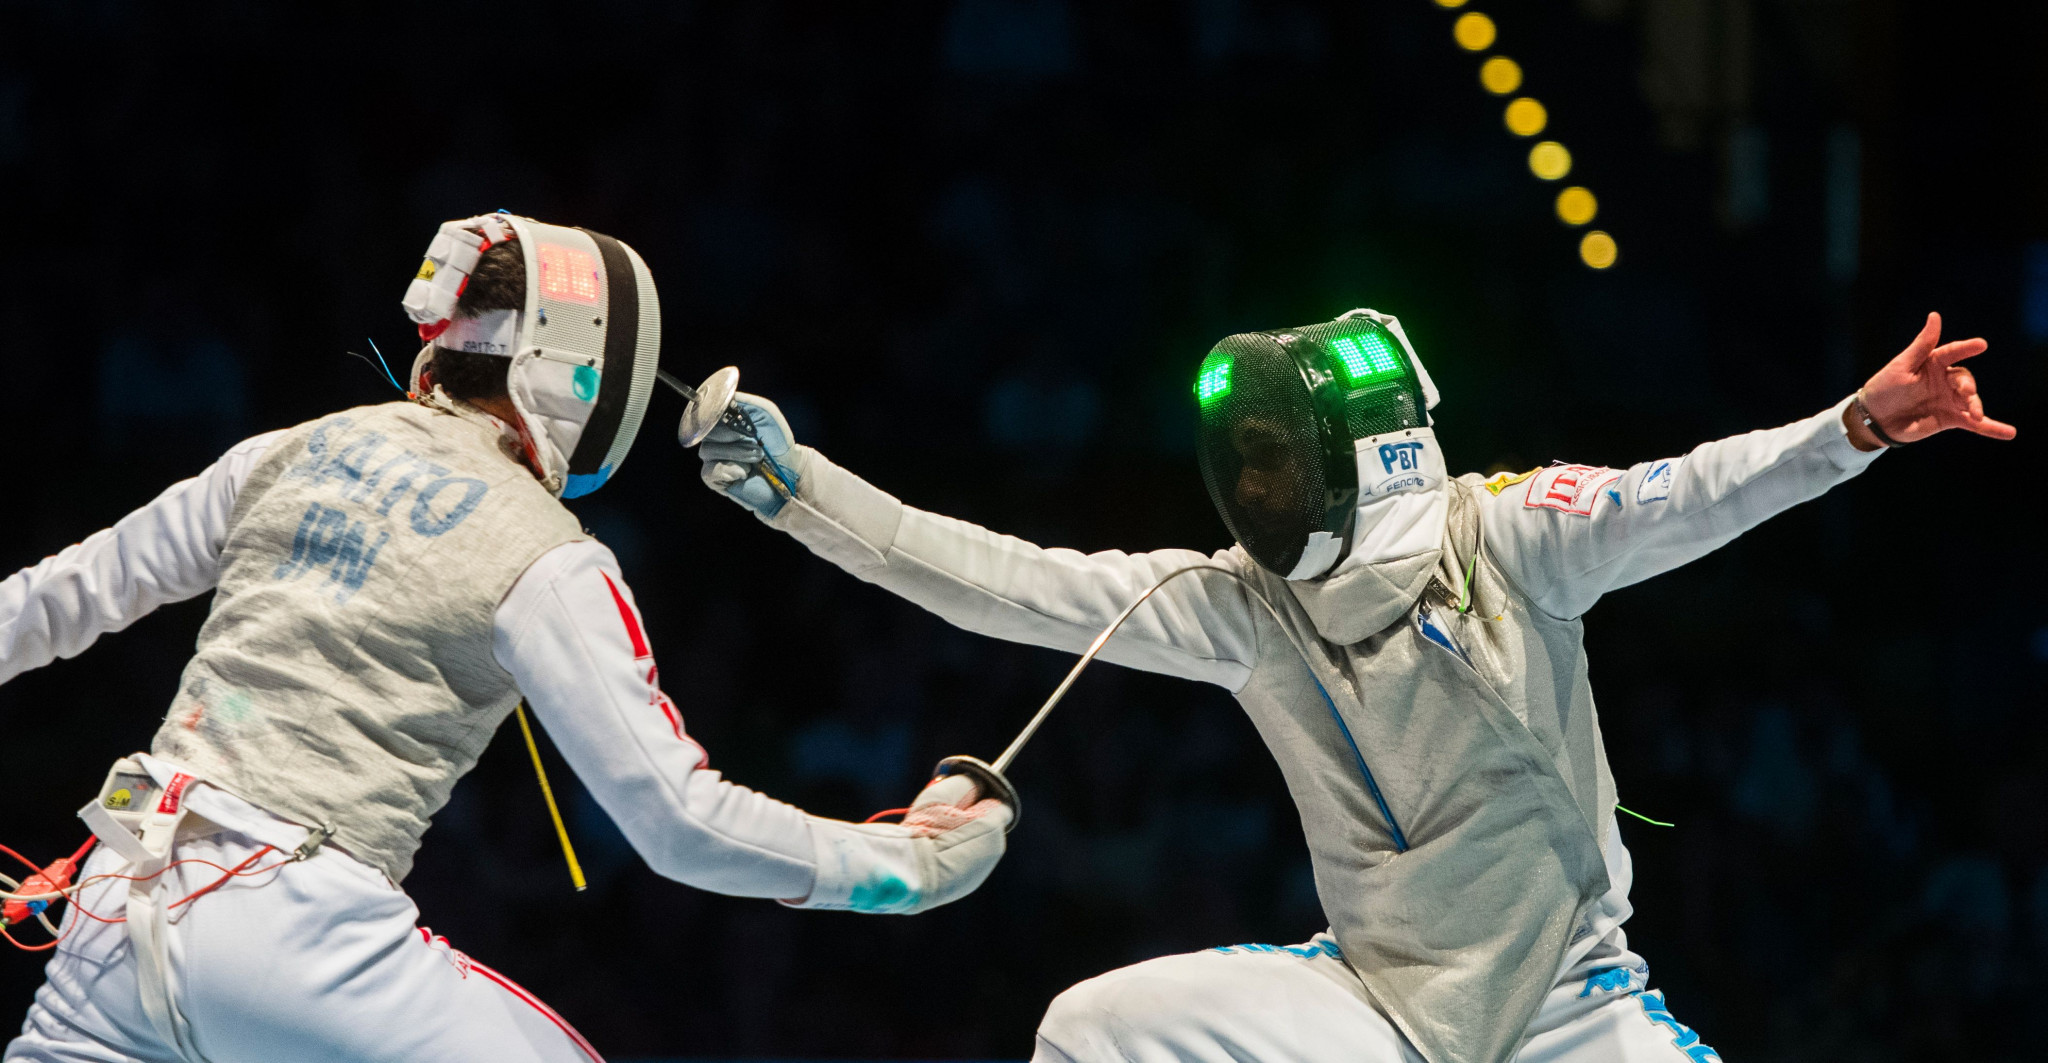 Italy's Daniele Garozzo, right, is among the fencers due to compete at the FIE Men's Foil World Cup in Tokyo ©Getty Images